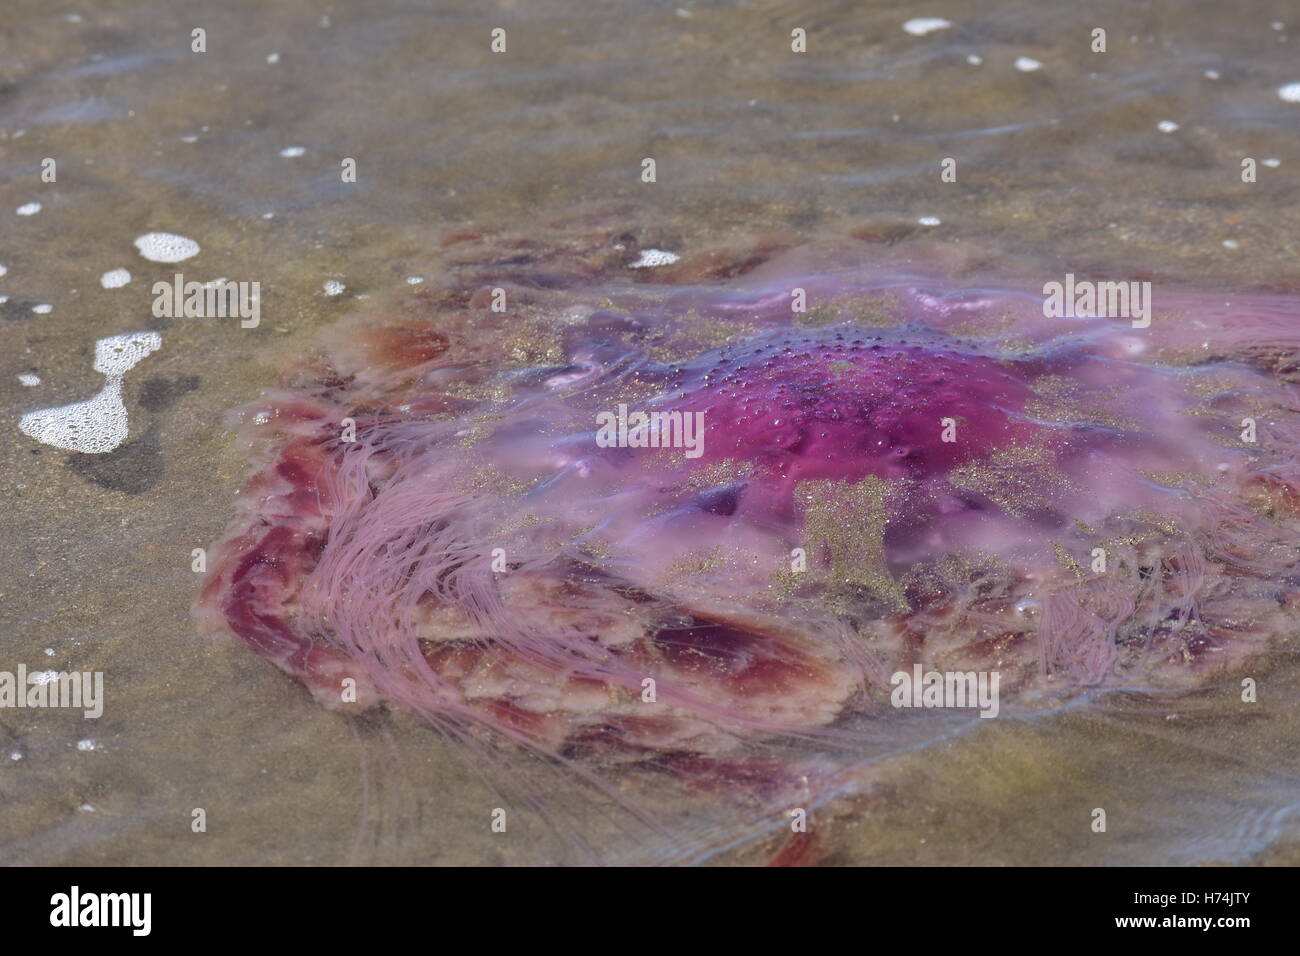 Pink and clear jellyfish stranded in shallow water. Stock Photo